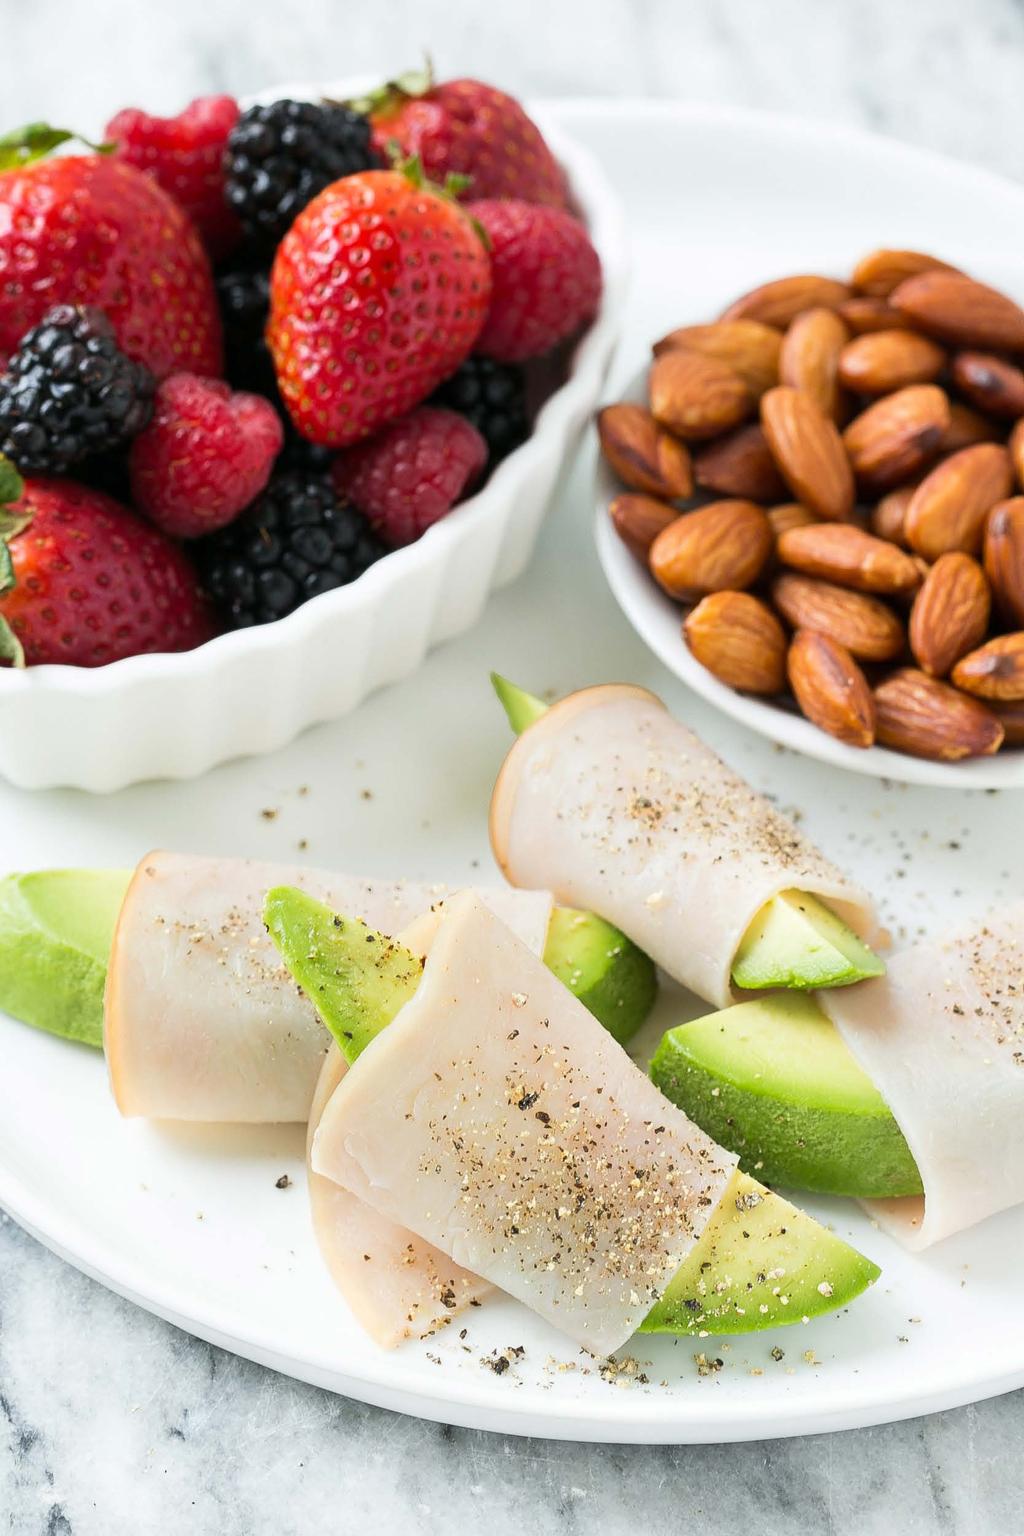 12. Turkey Avocado Protein Plate A simple yet flavorful protein packed meal that can be assembled in minutes.